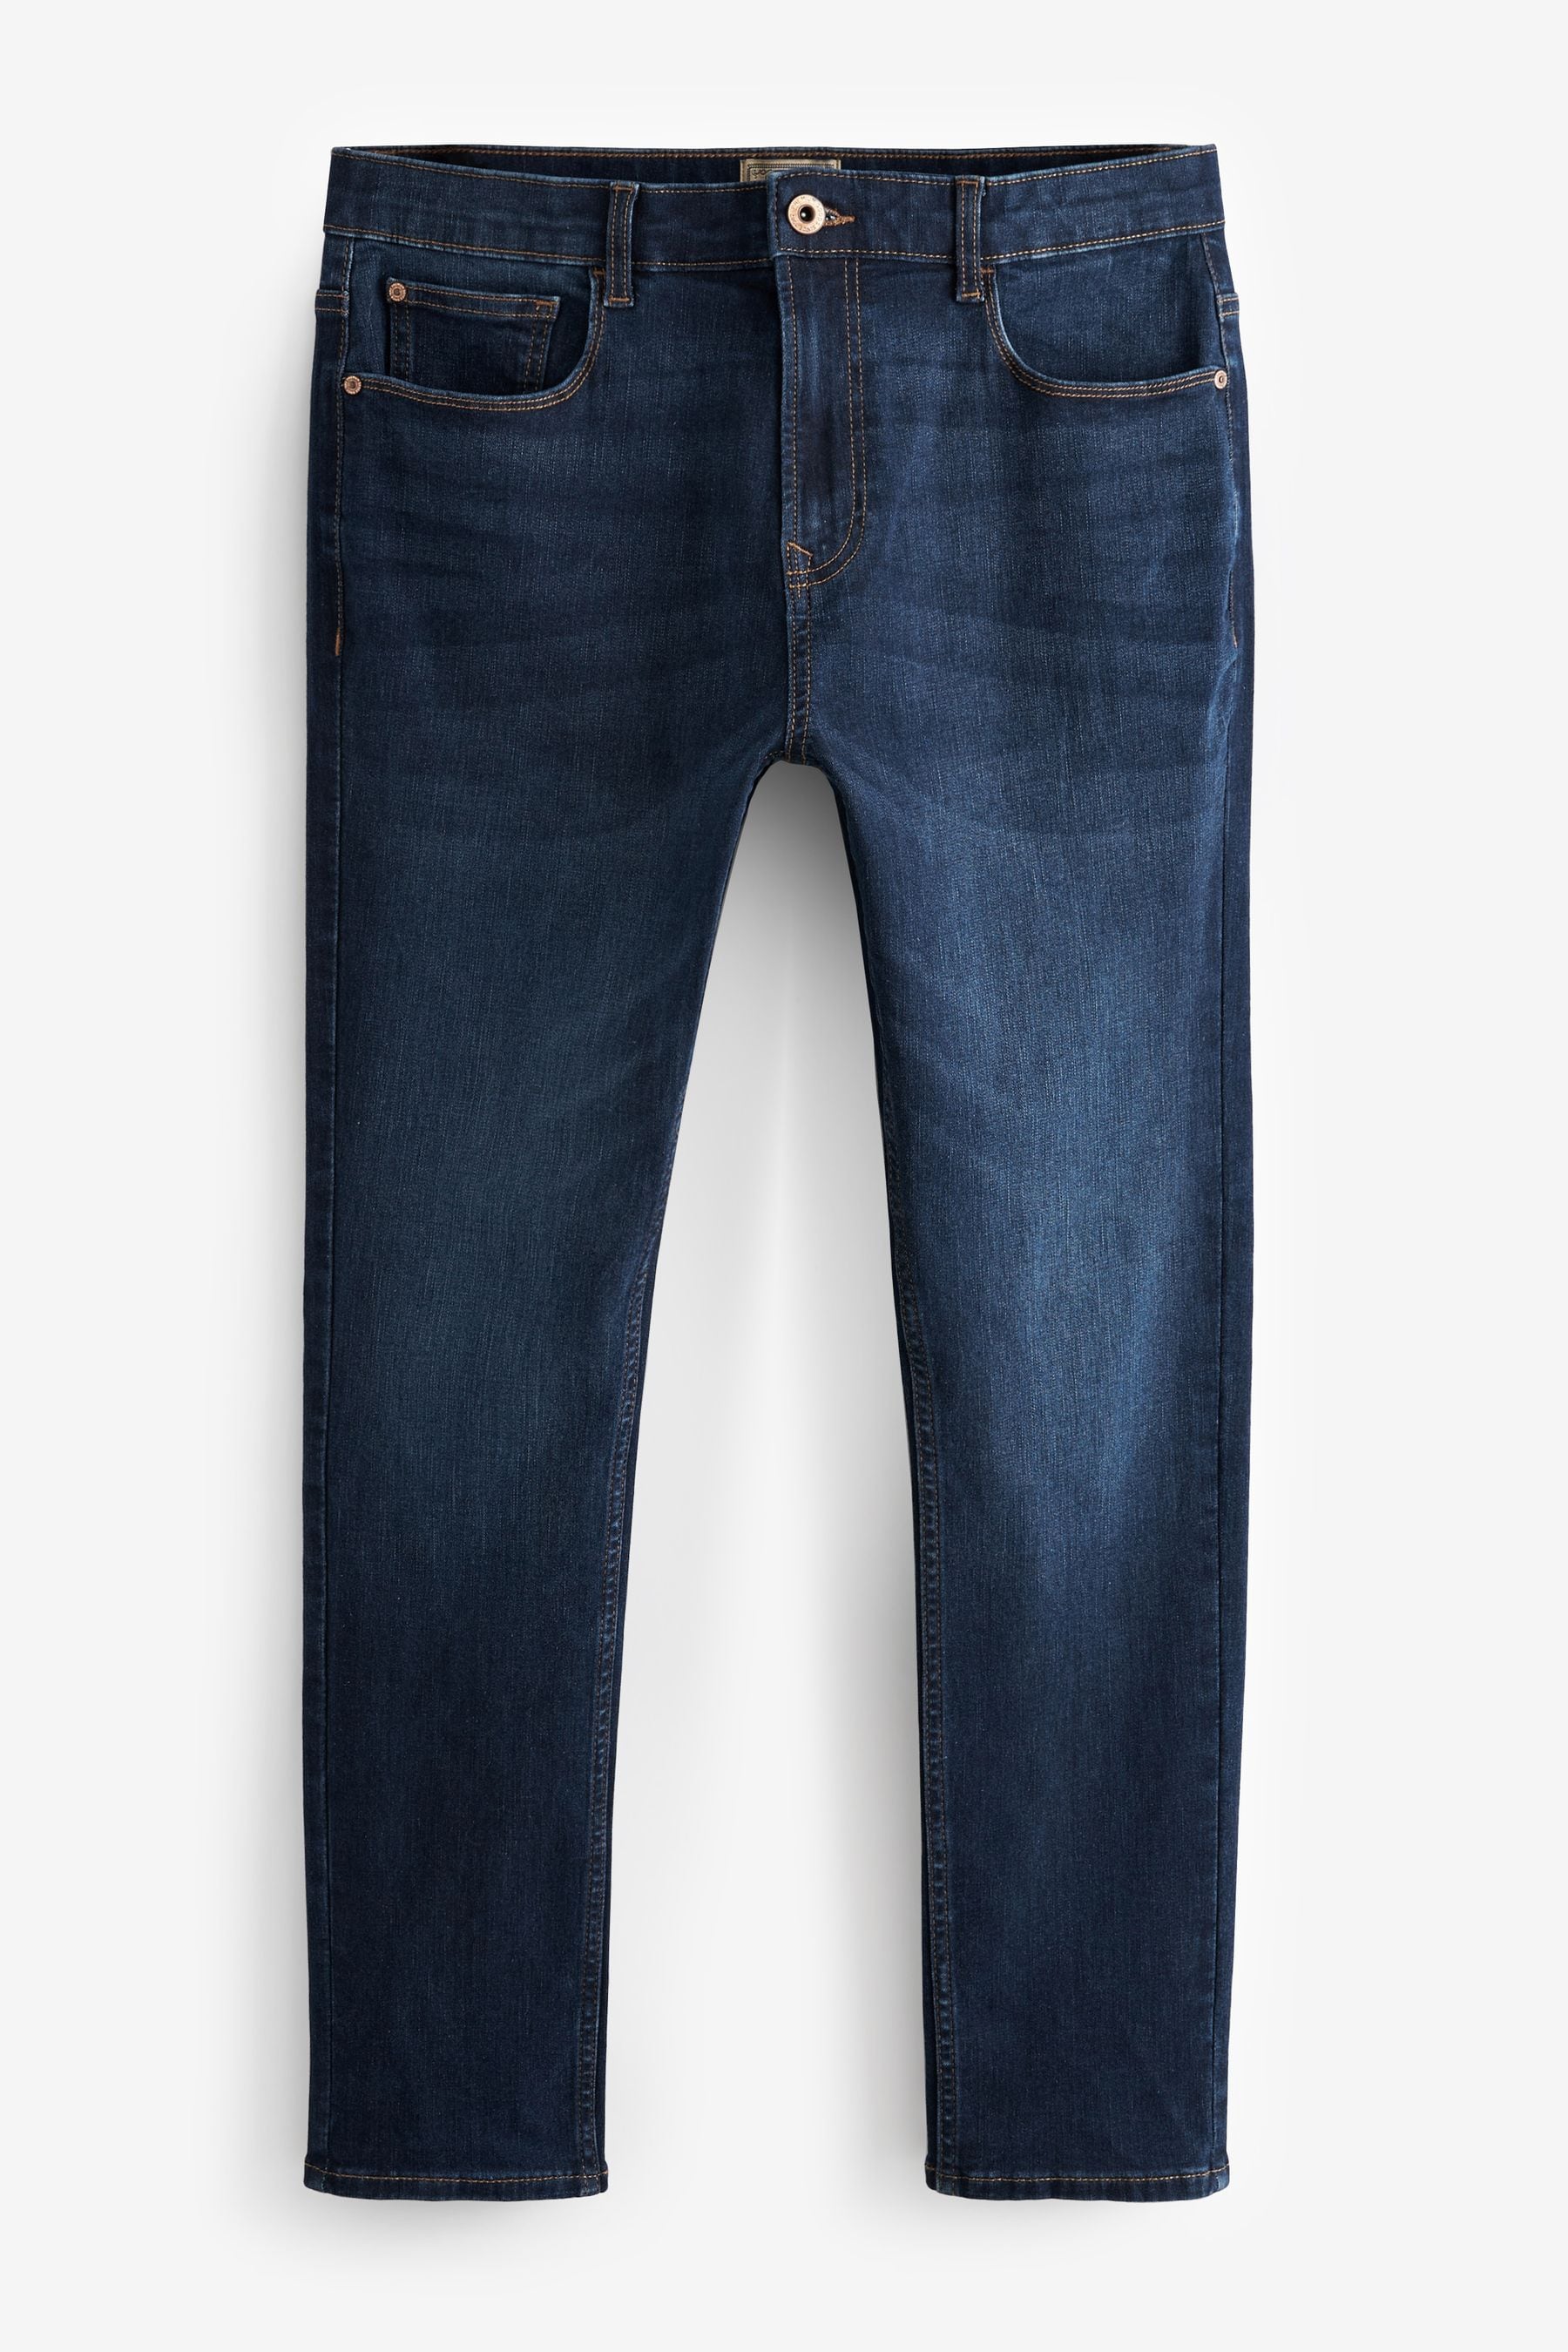 Buy Mid Blue Skinny Classic Stretch Jeans from the Next UK online shop